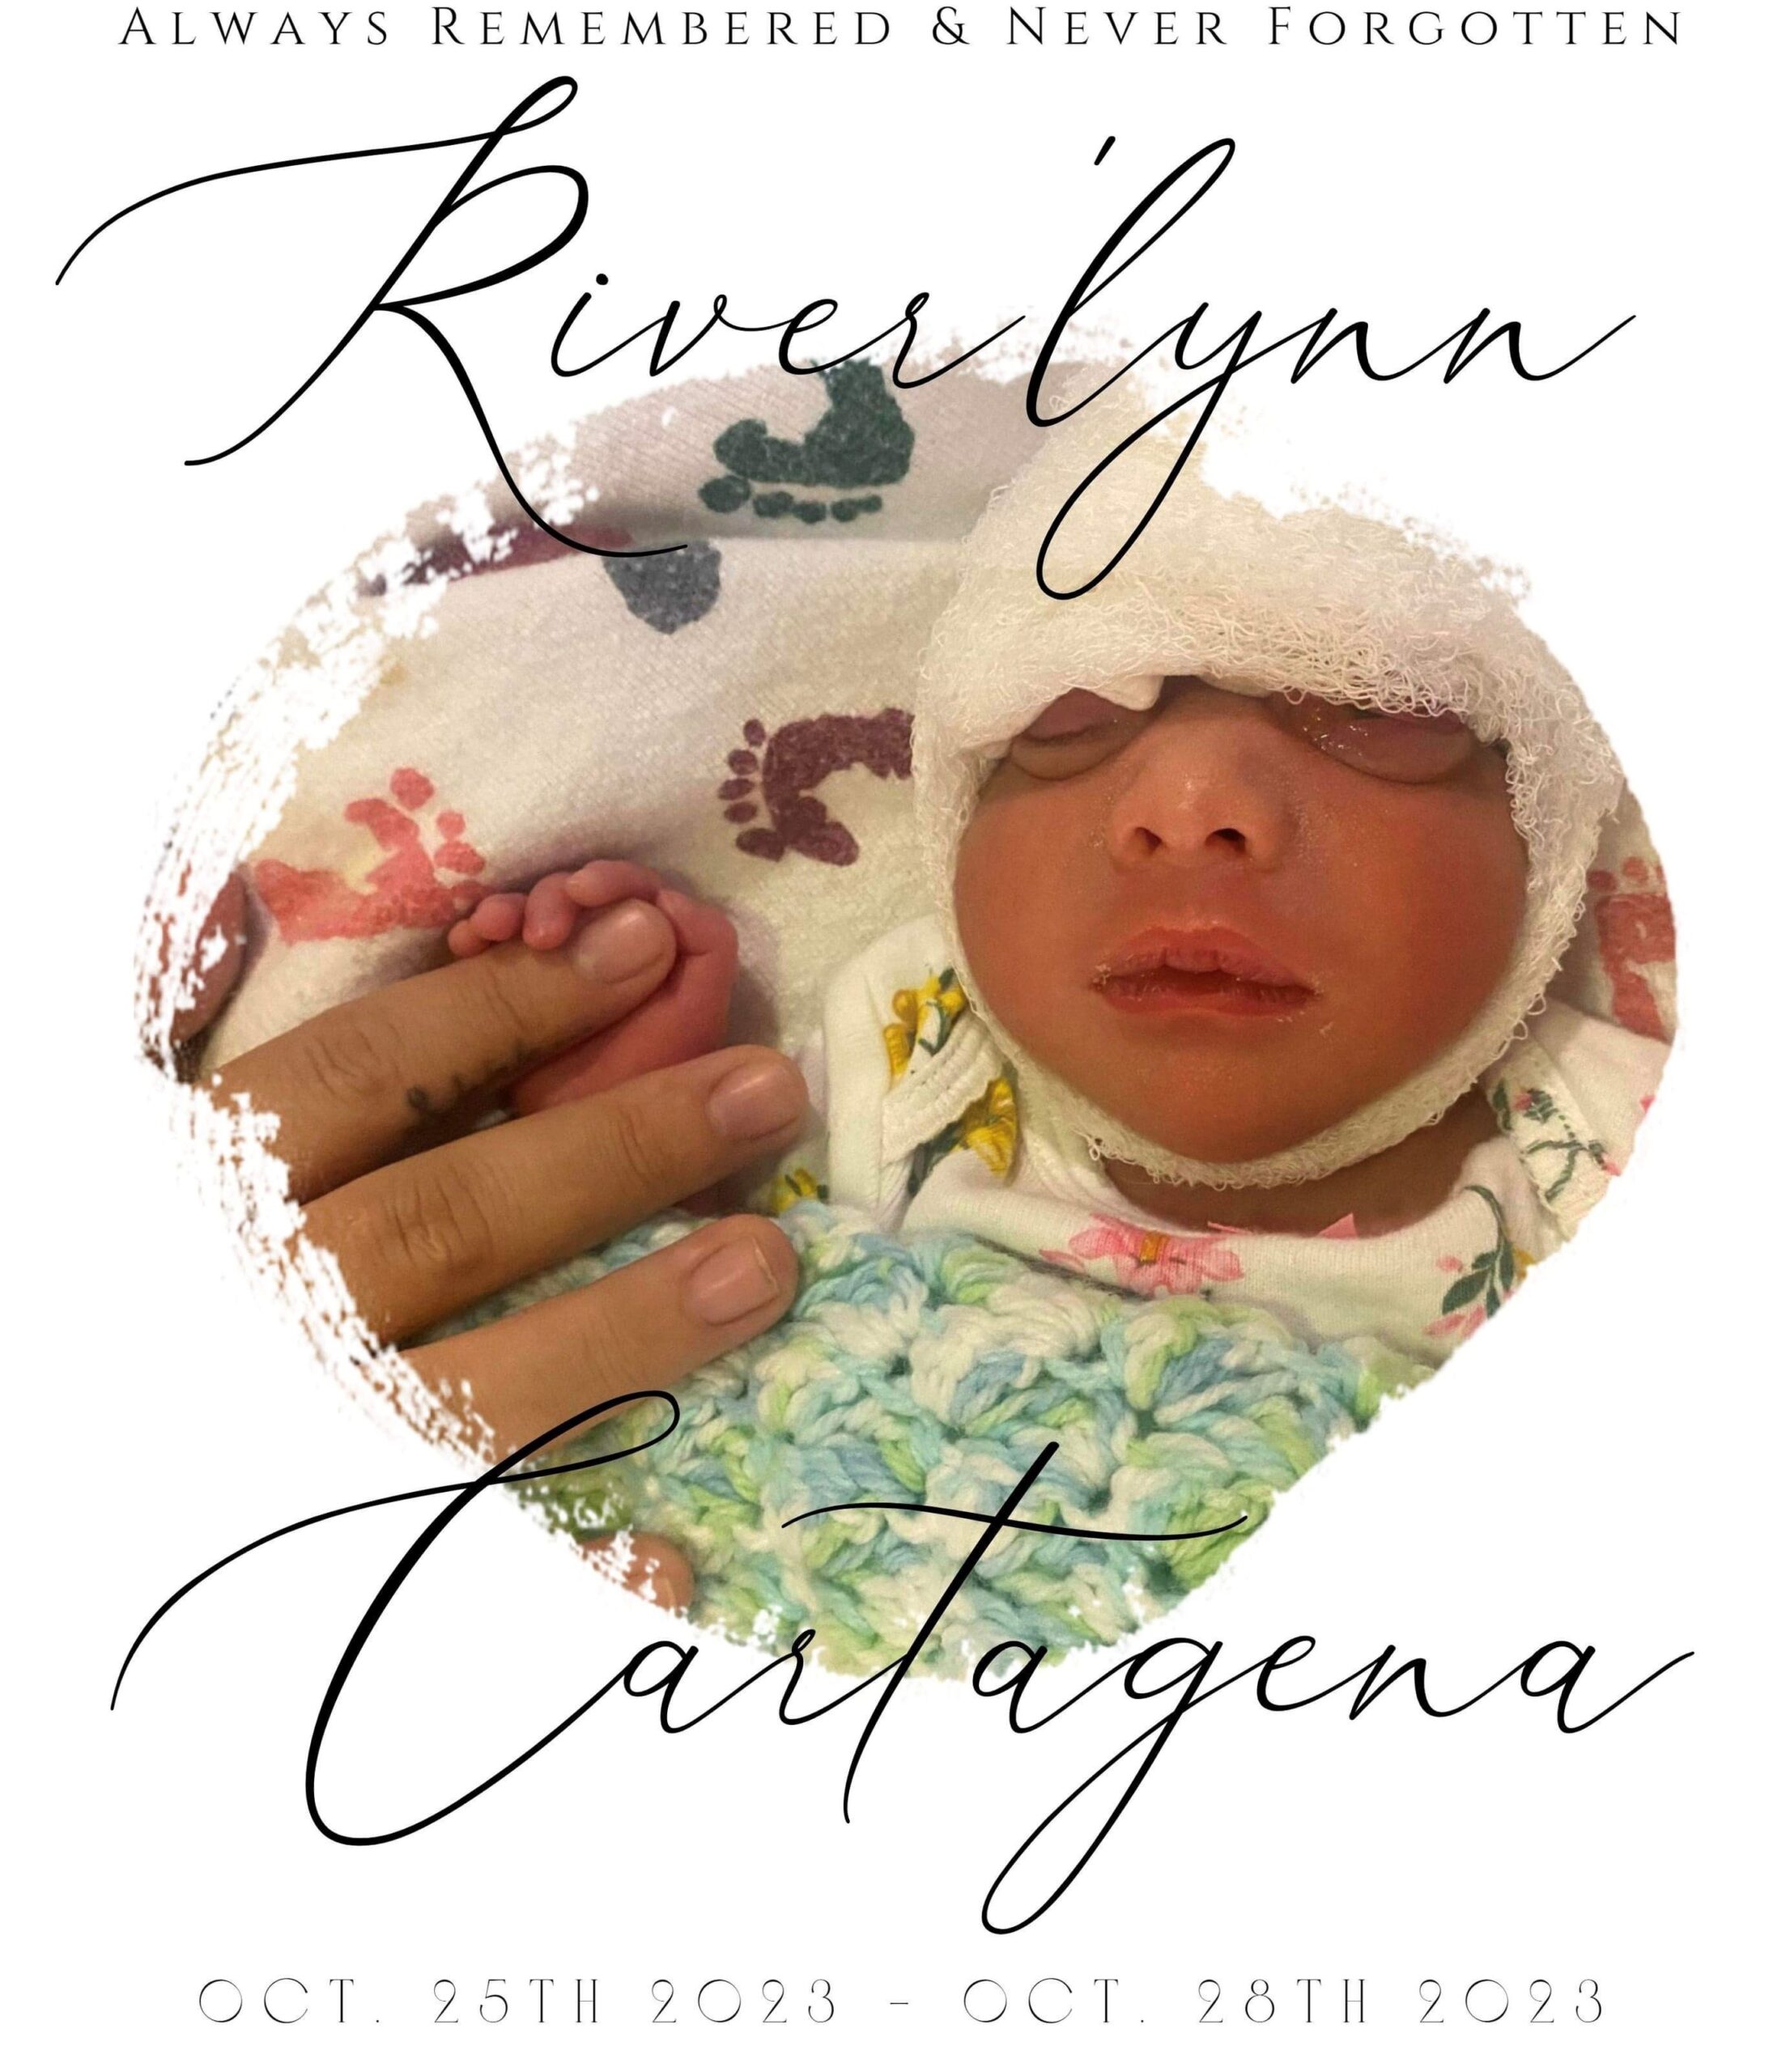 The Funeral Service for River'lynn Cartagena 11/18/23 2 p.m.